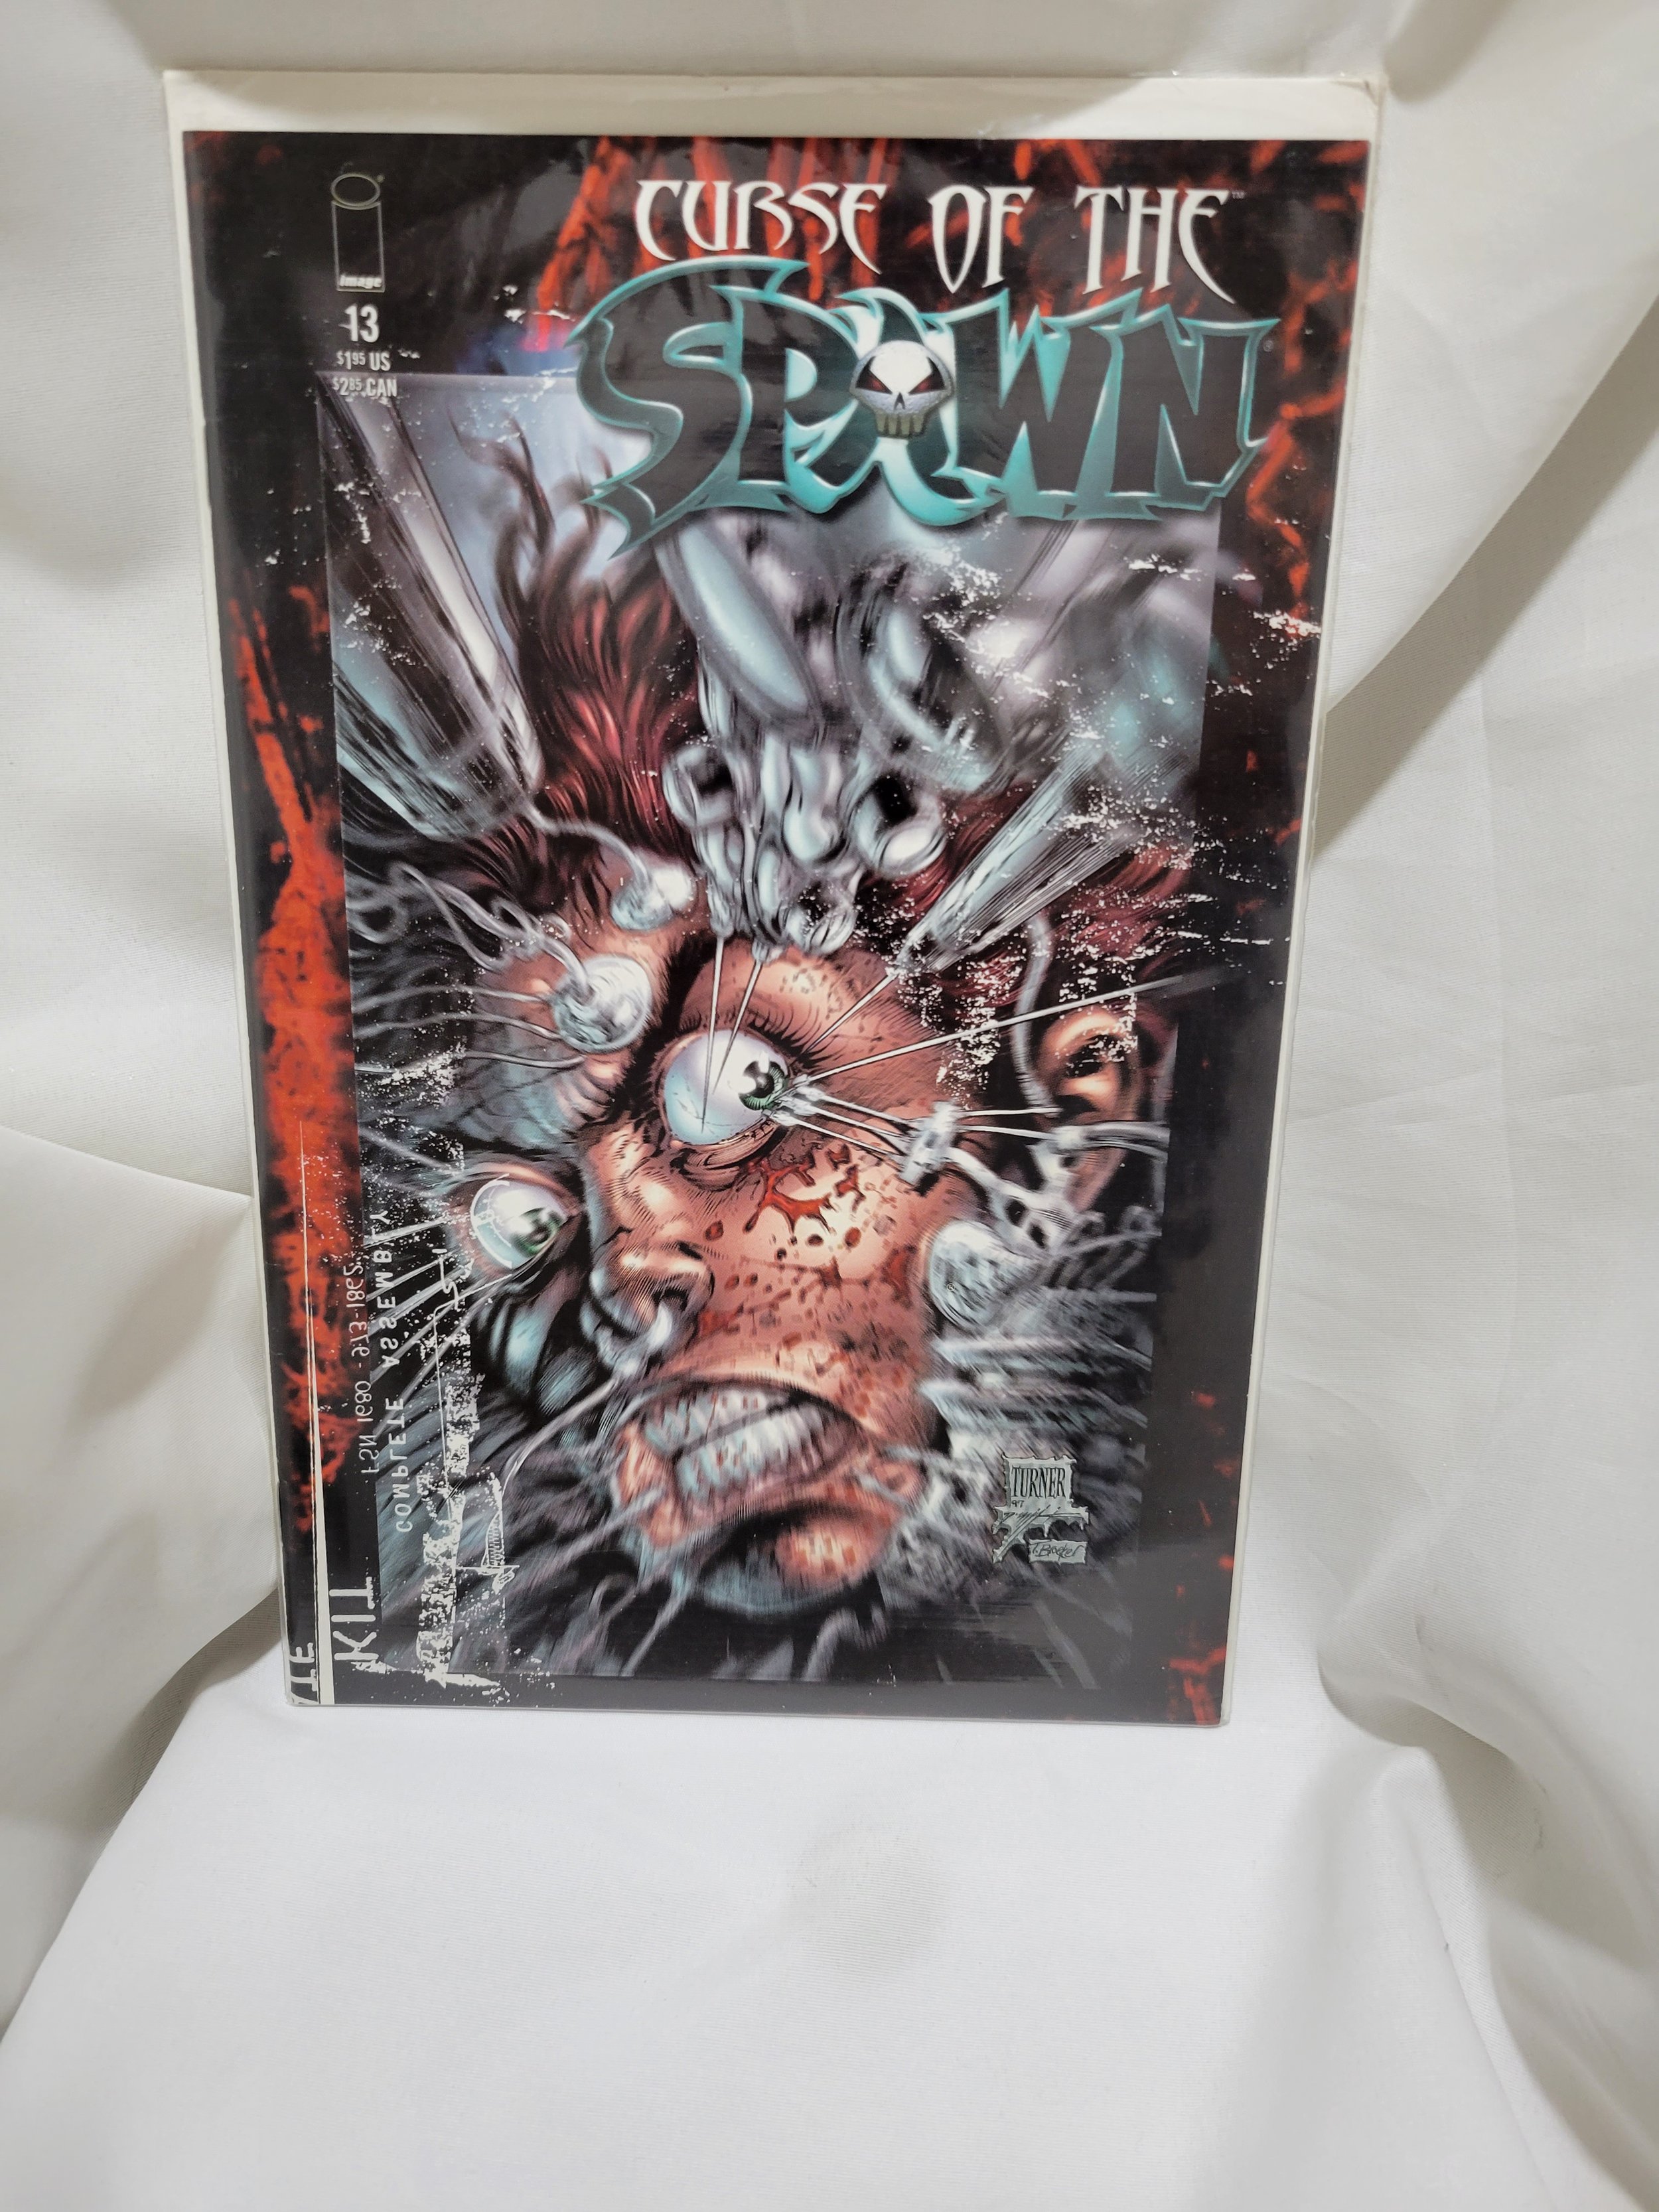 Curse Of The Spawn #13 — The Crows Foot Antiques, Oddities, and